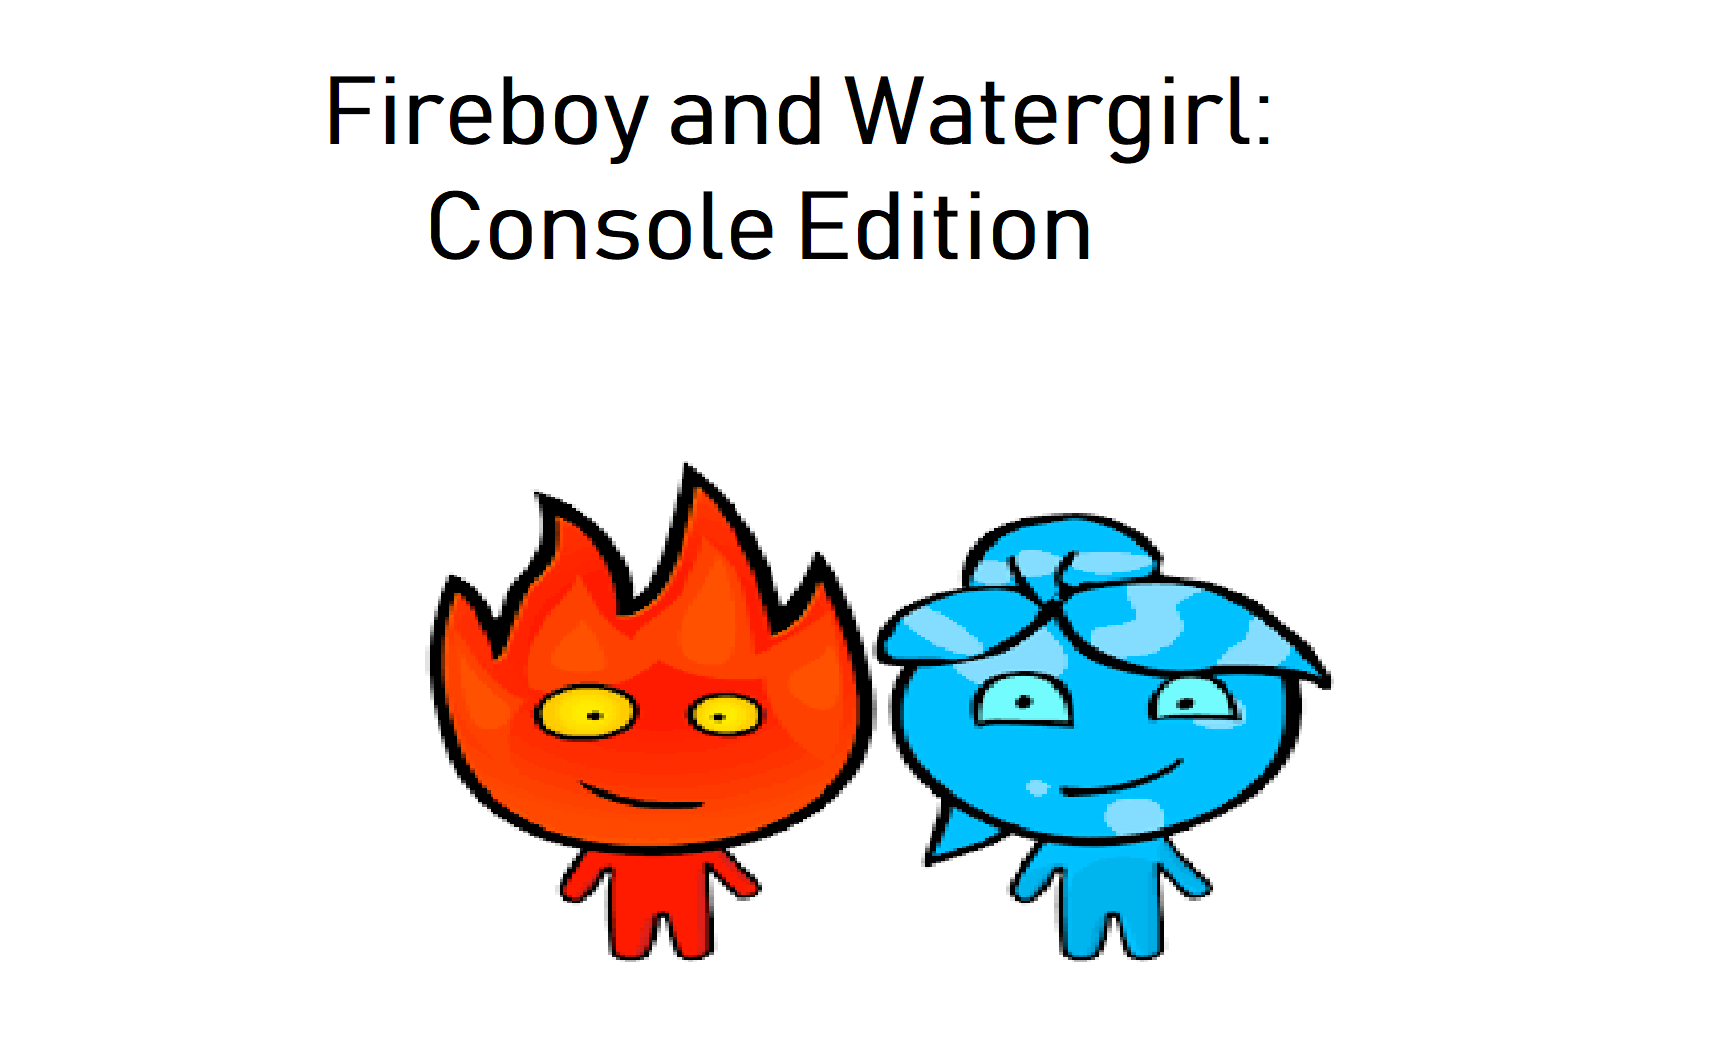 Fireboy and Watergirl, Game Ideas Wiki